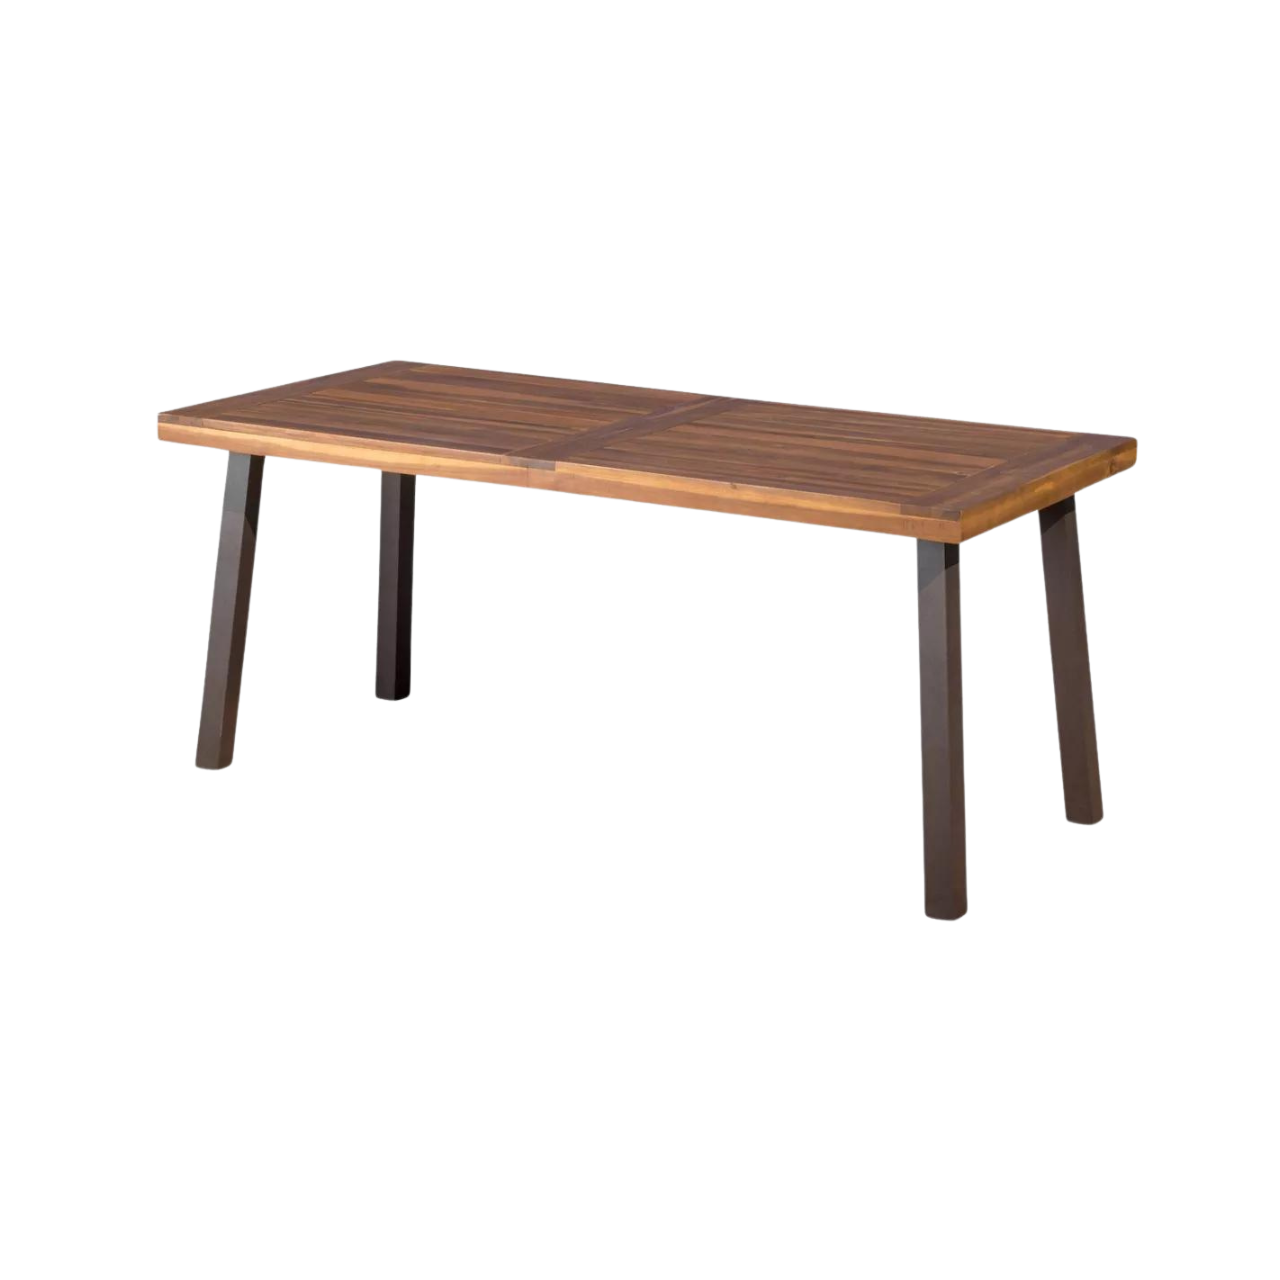 68.75" x 33" Christopher Knight Della Rectangle Acacia Wood Dining Table (Teak)